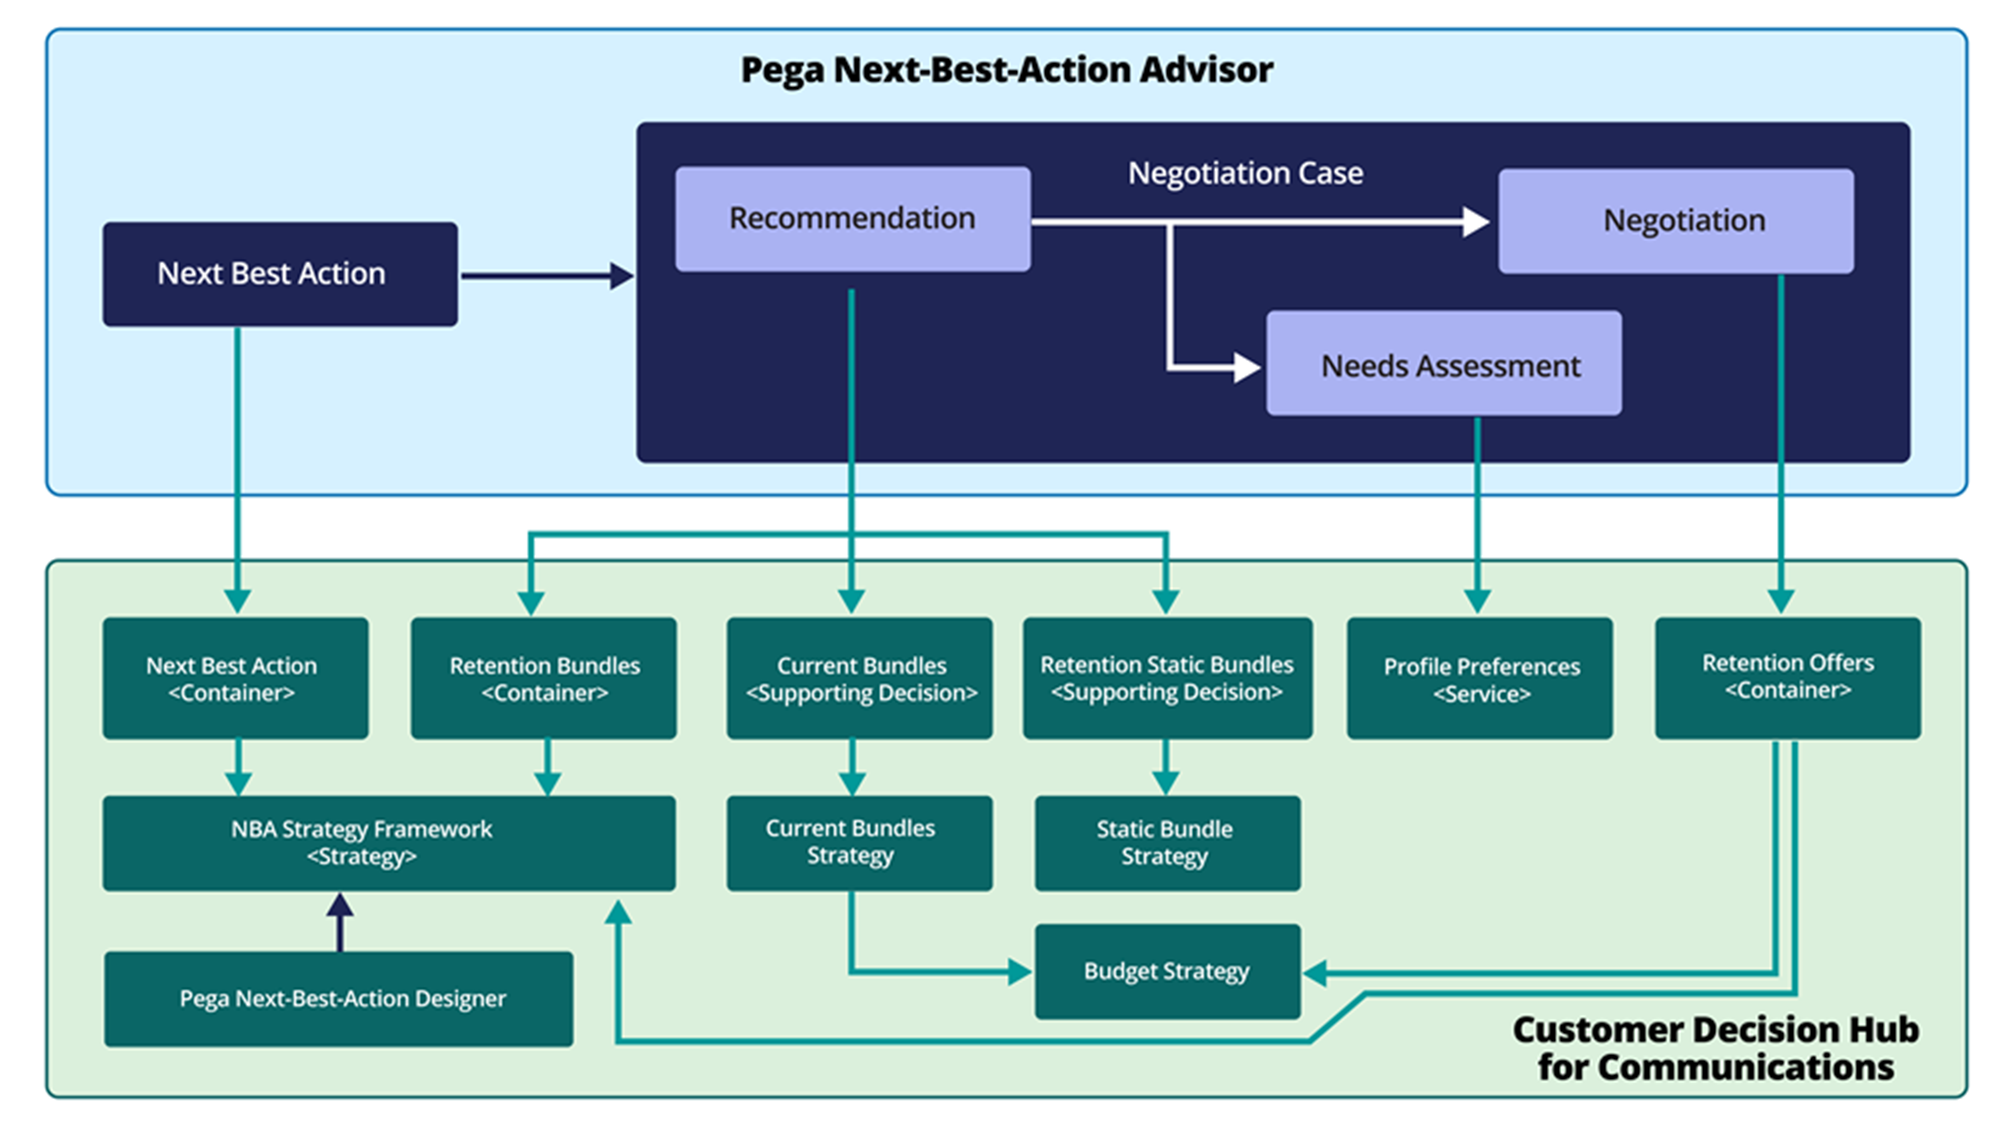 How pega next best action advisor works with pega customer decision hub for communications using the next best action strategy framework to return next best action.